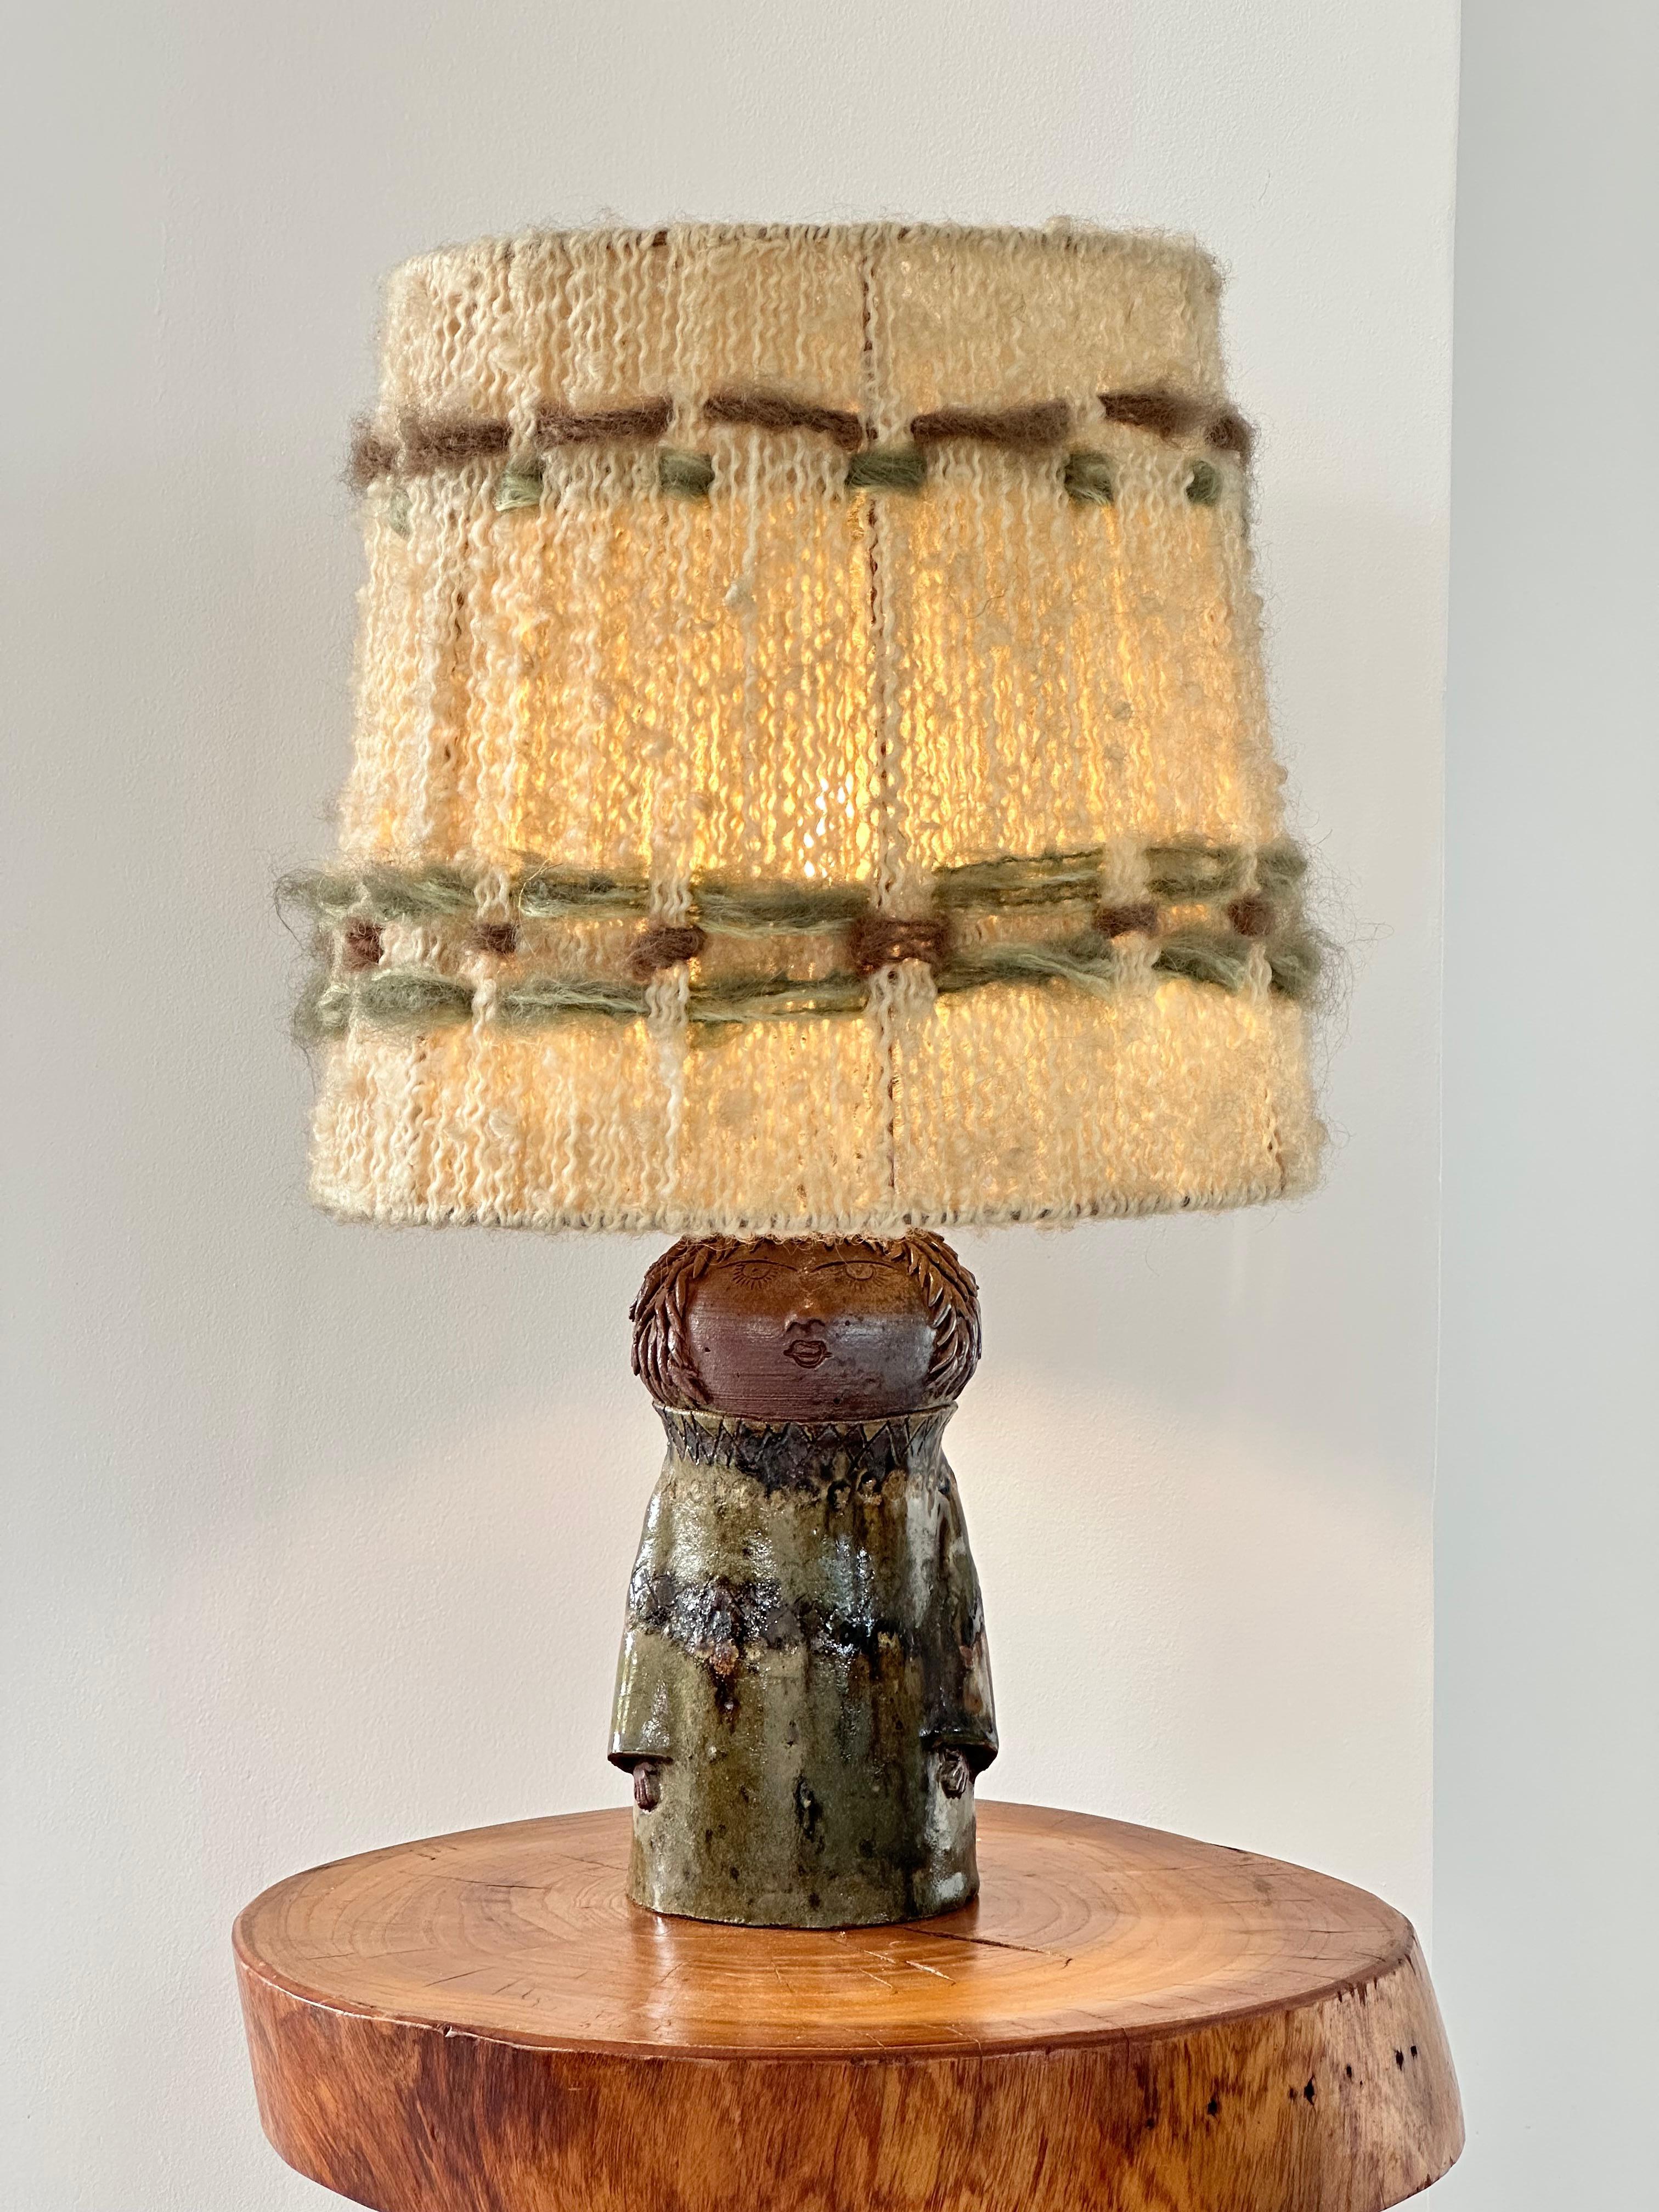 This Anthropomorphic table lamp is a unique work.

From the La Borne workshops this lamp is in enameled stoneware.

The lamp is marked with a signature made at the tip and hollow. (dimensions of the lamp excluding lampshade: diameter 9 cm, height 19